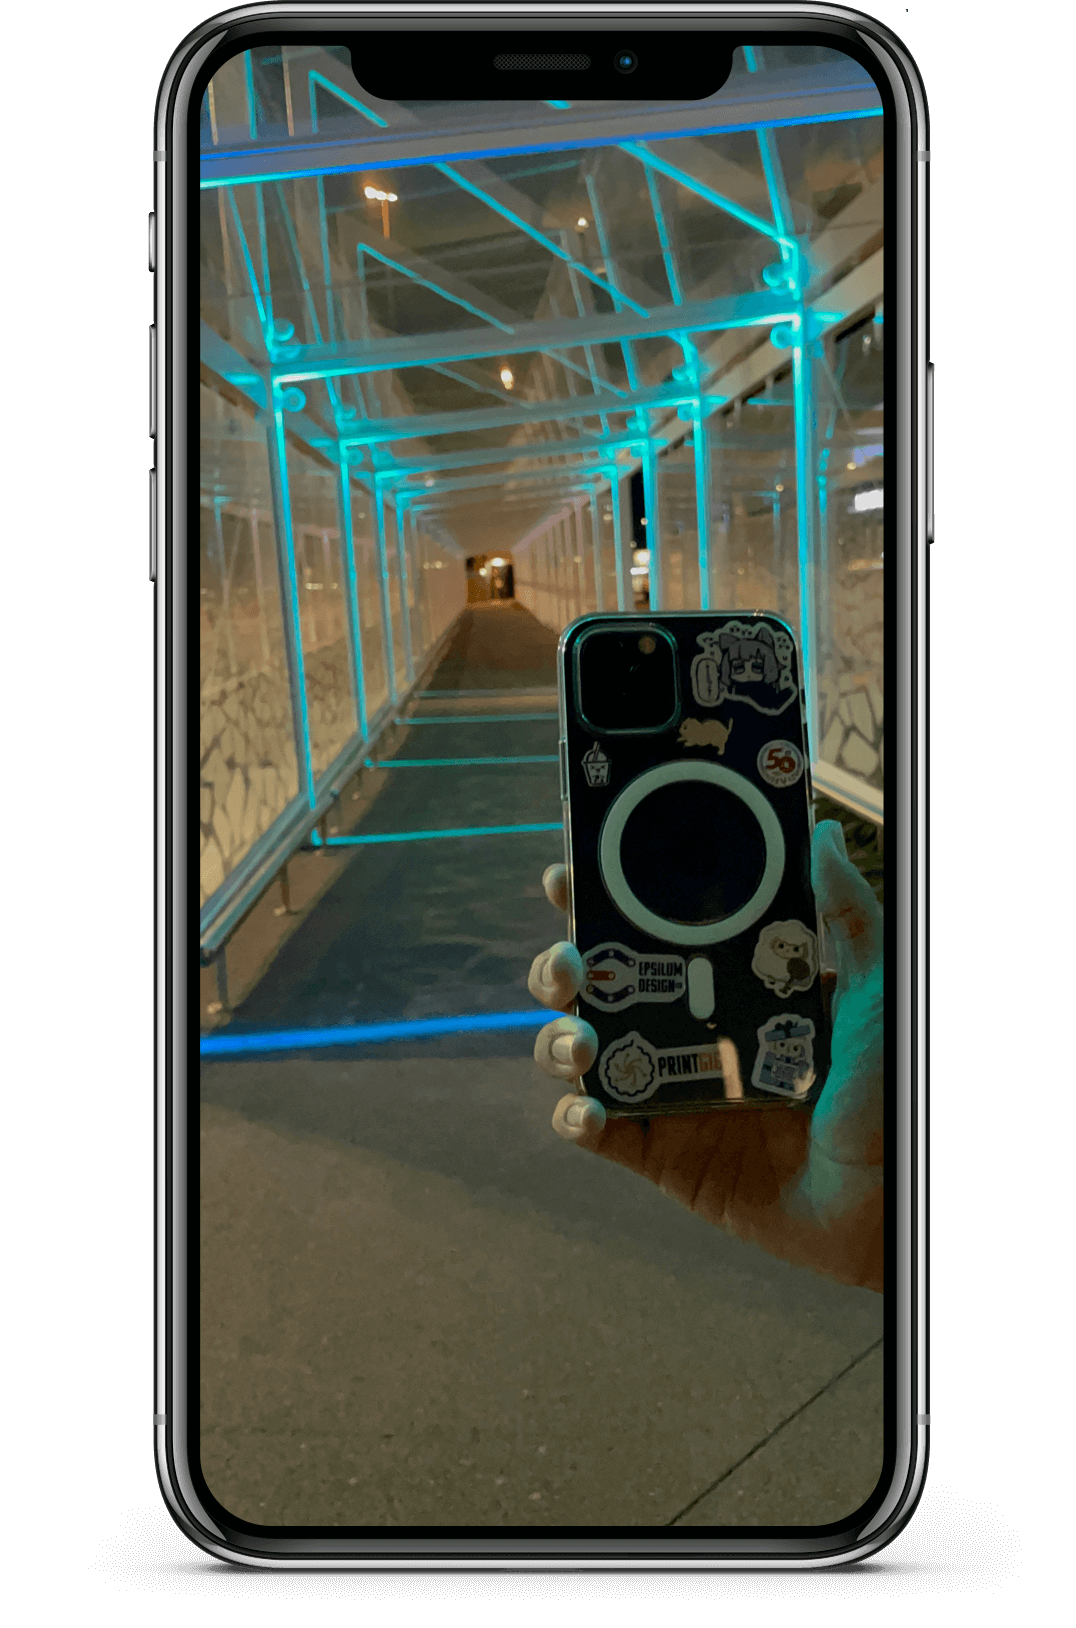 Photo of CIAL Walkway on an Iphone